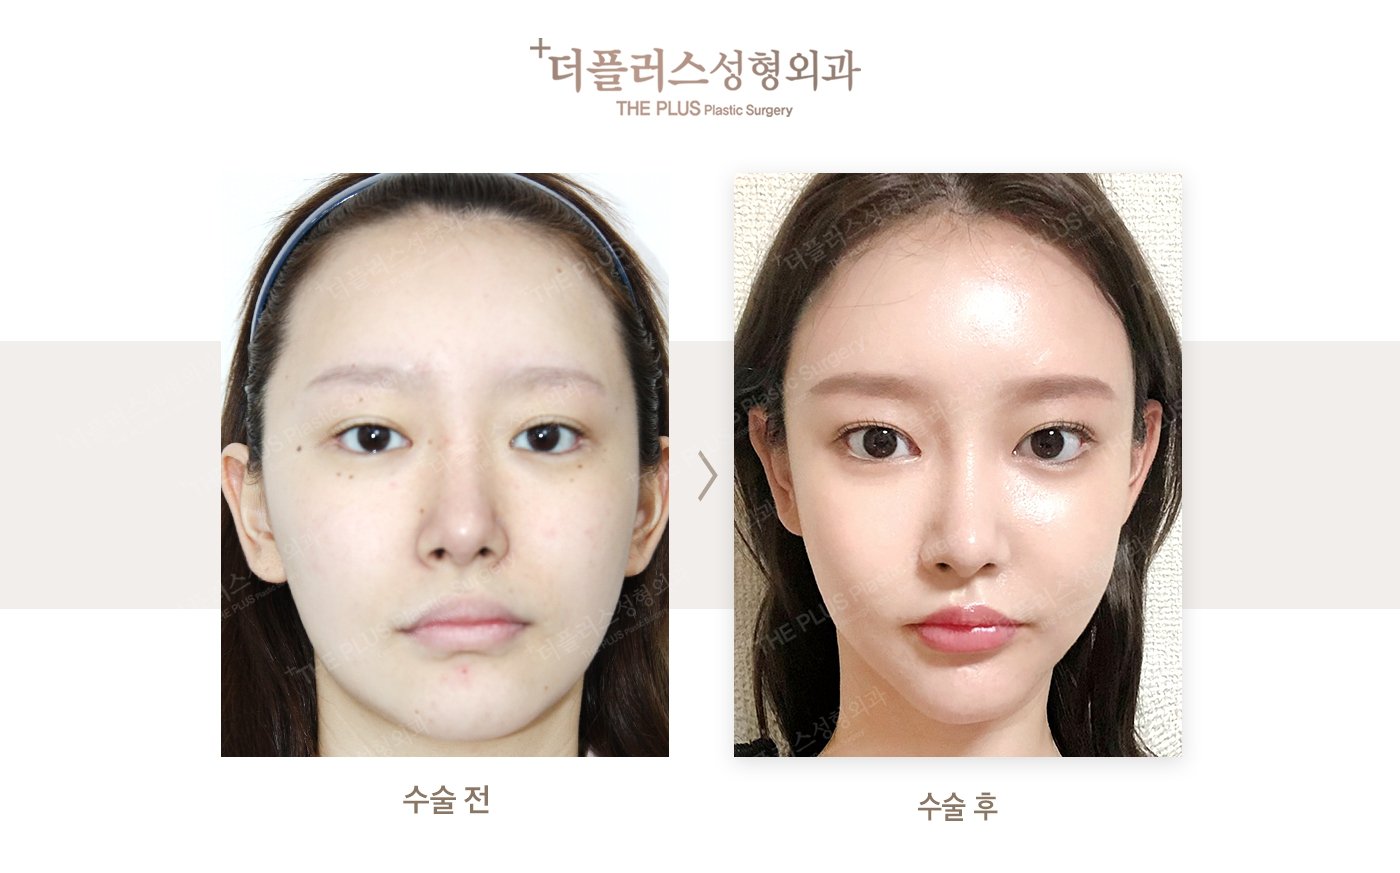 jaw implant korea before after